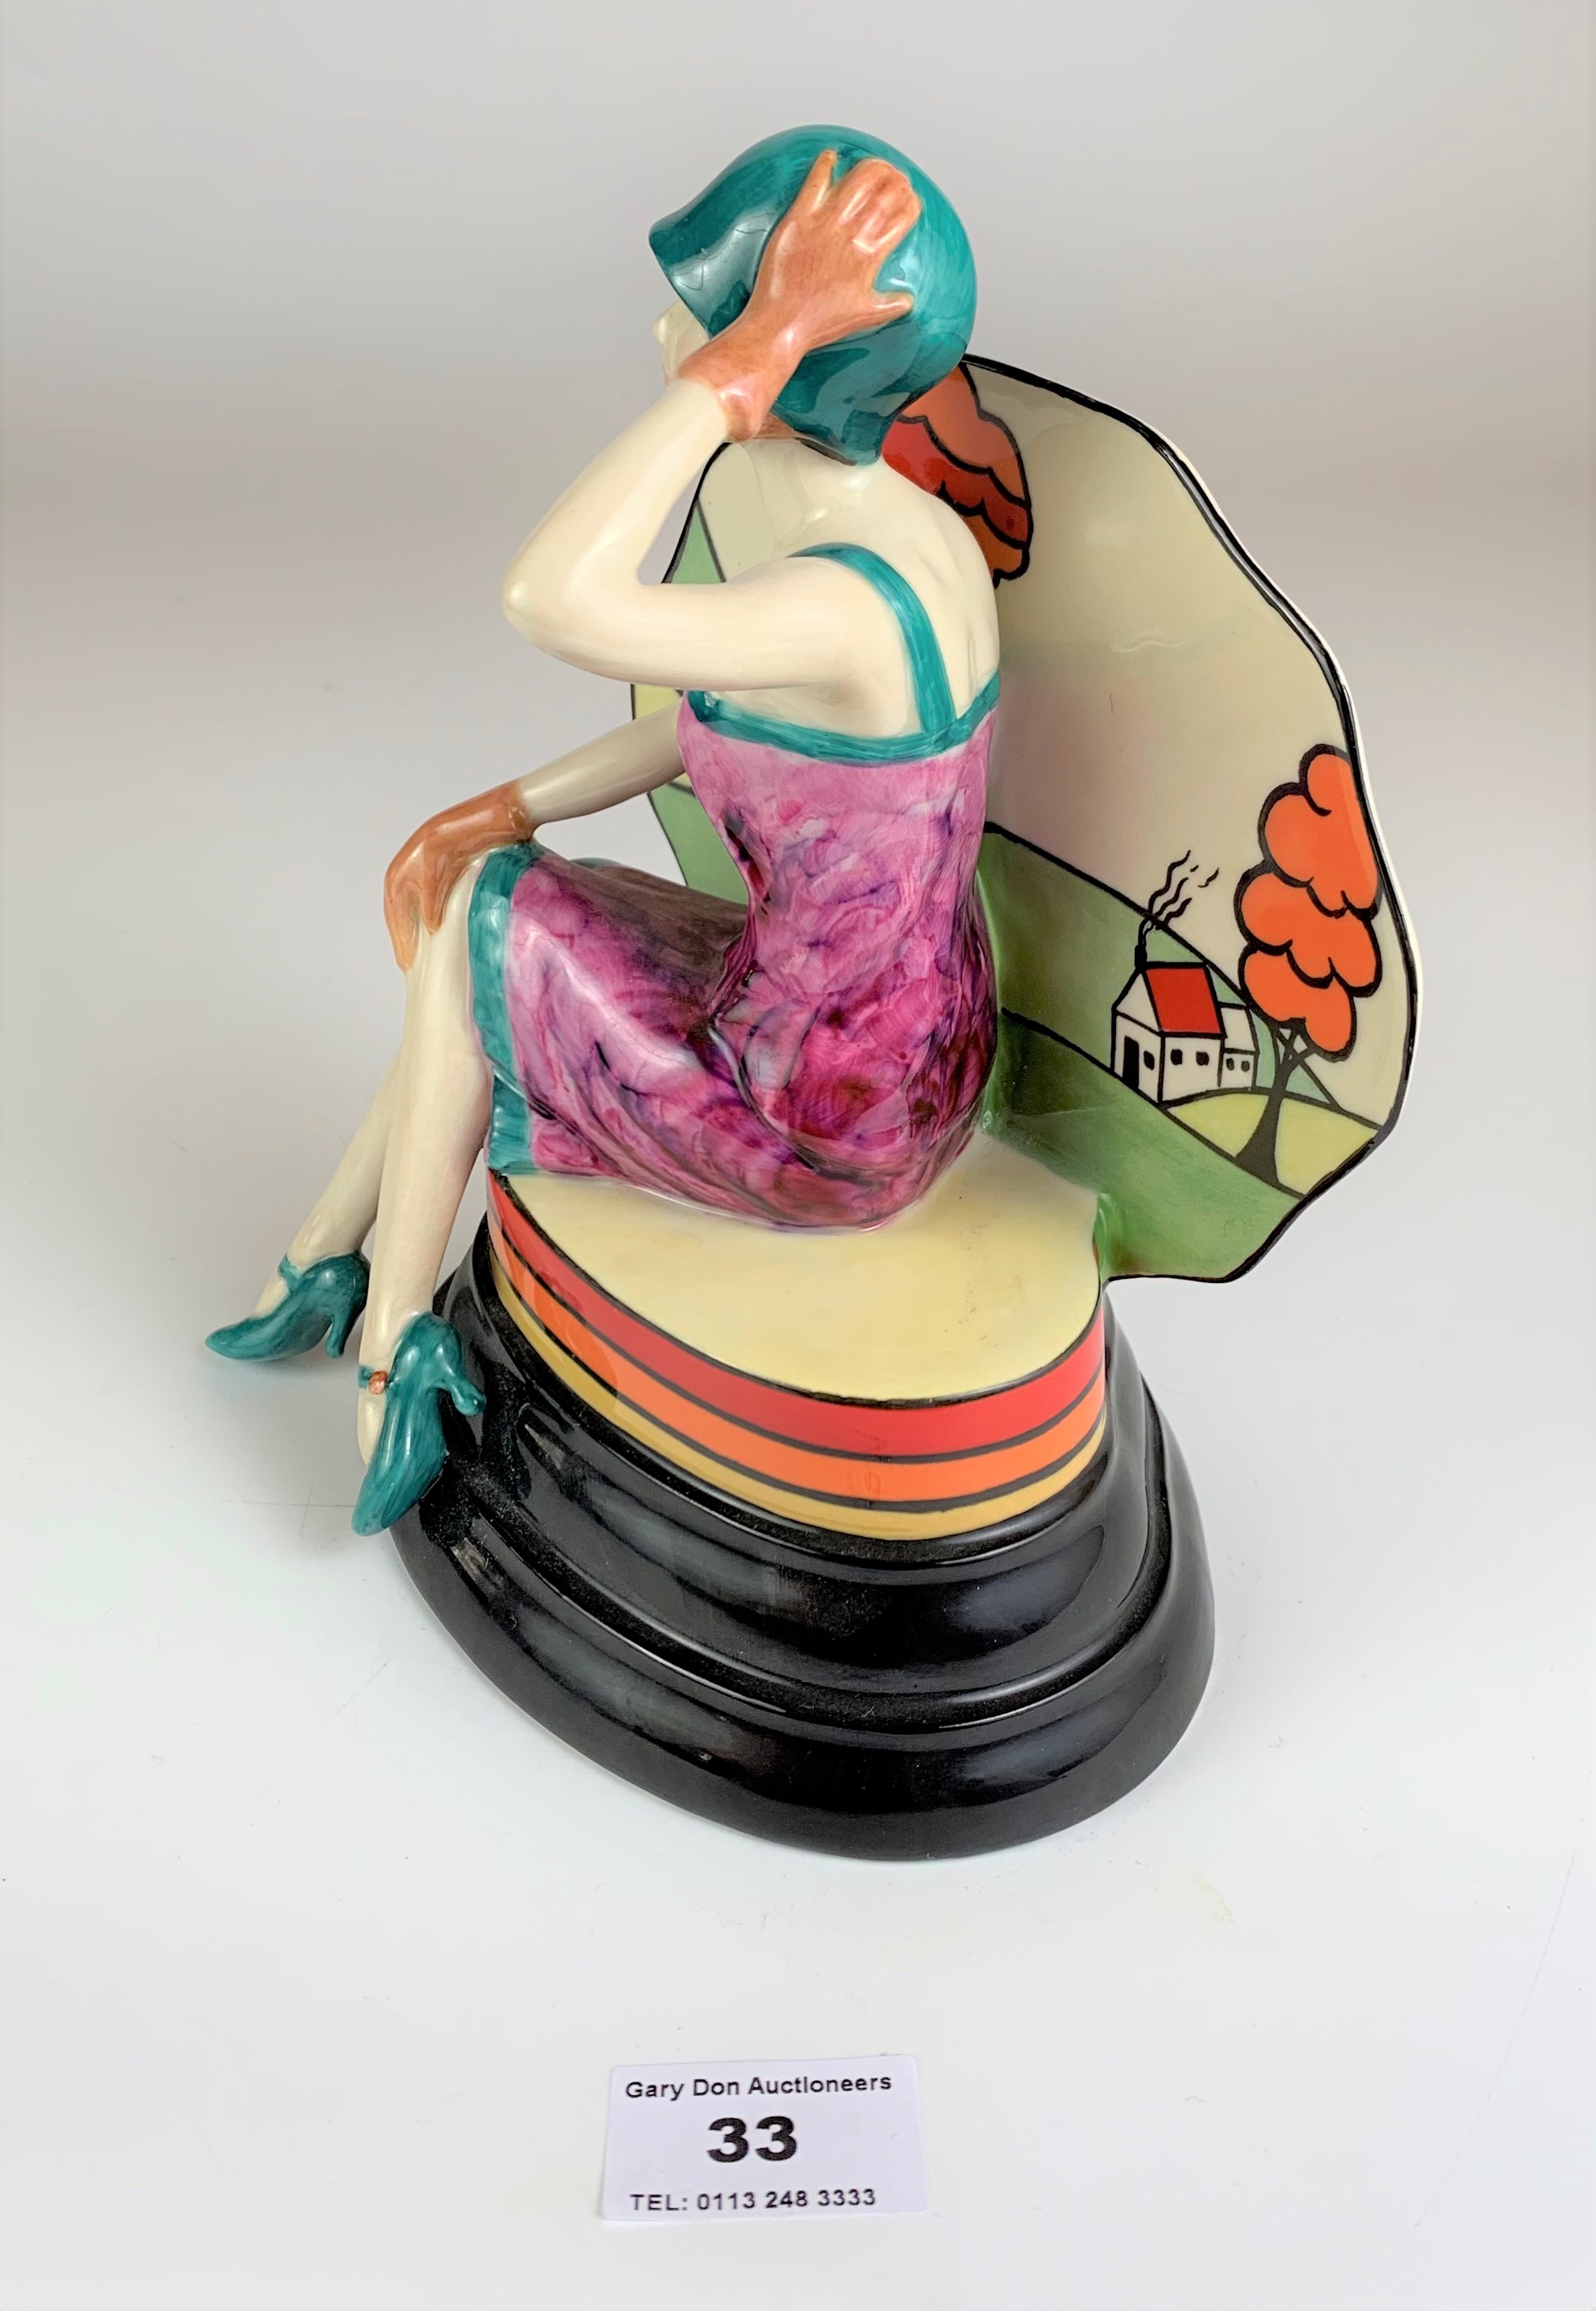 Ceramic figure by Peggy Davies – Putting on the Ritz, no. 147/1250 - Image 4 of 5